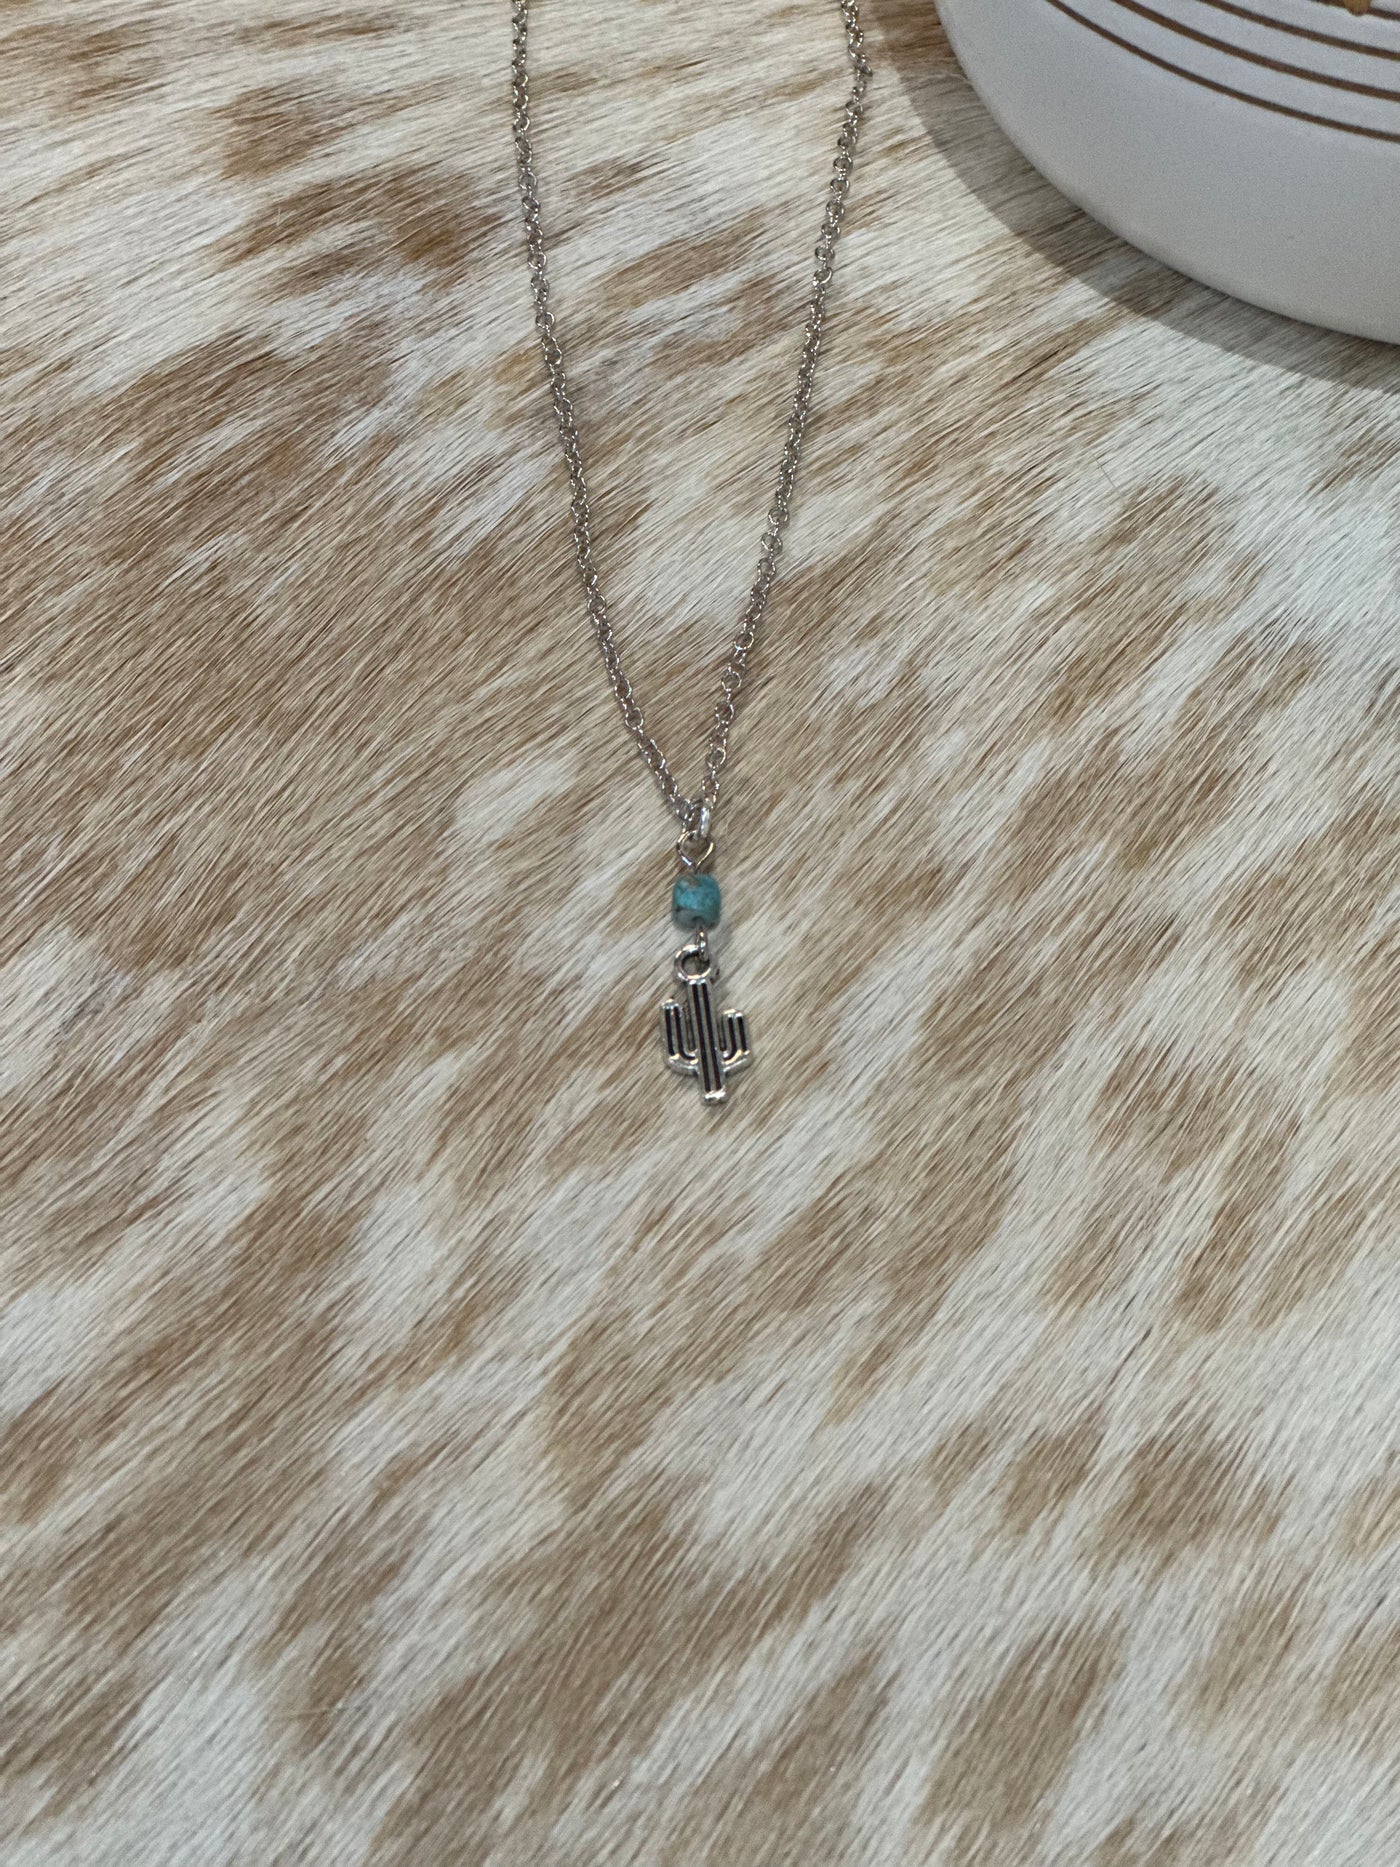 Turquoise and Cactus Chain Necklace